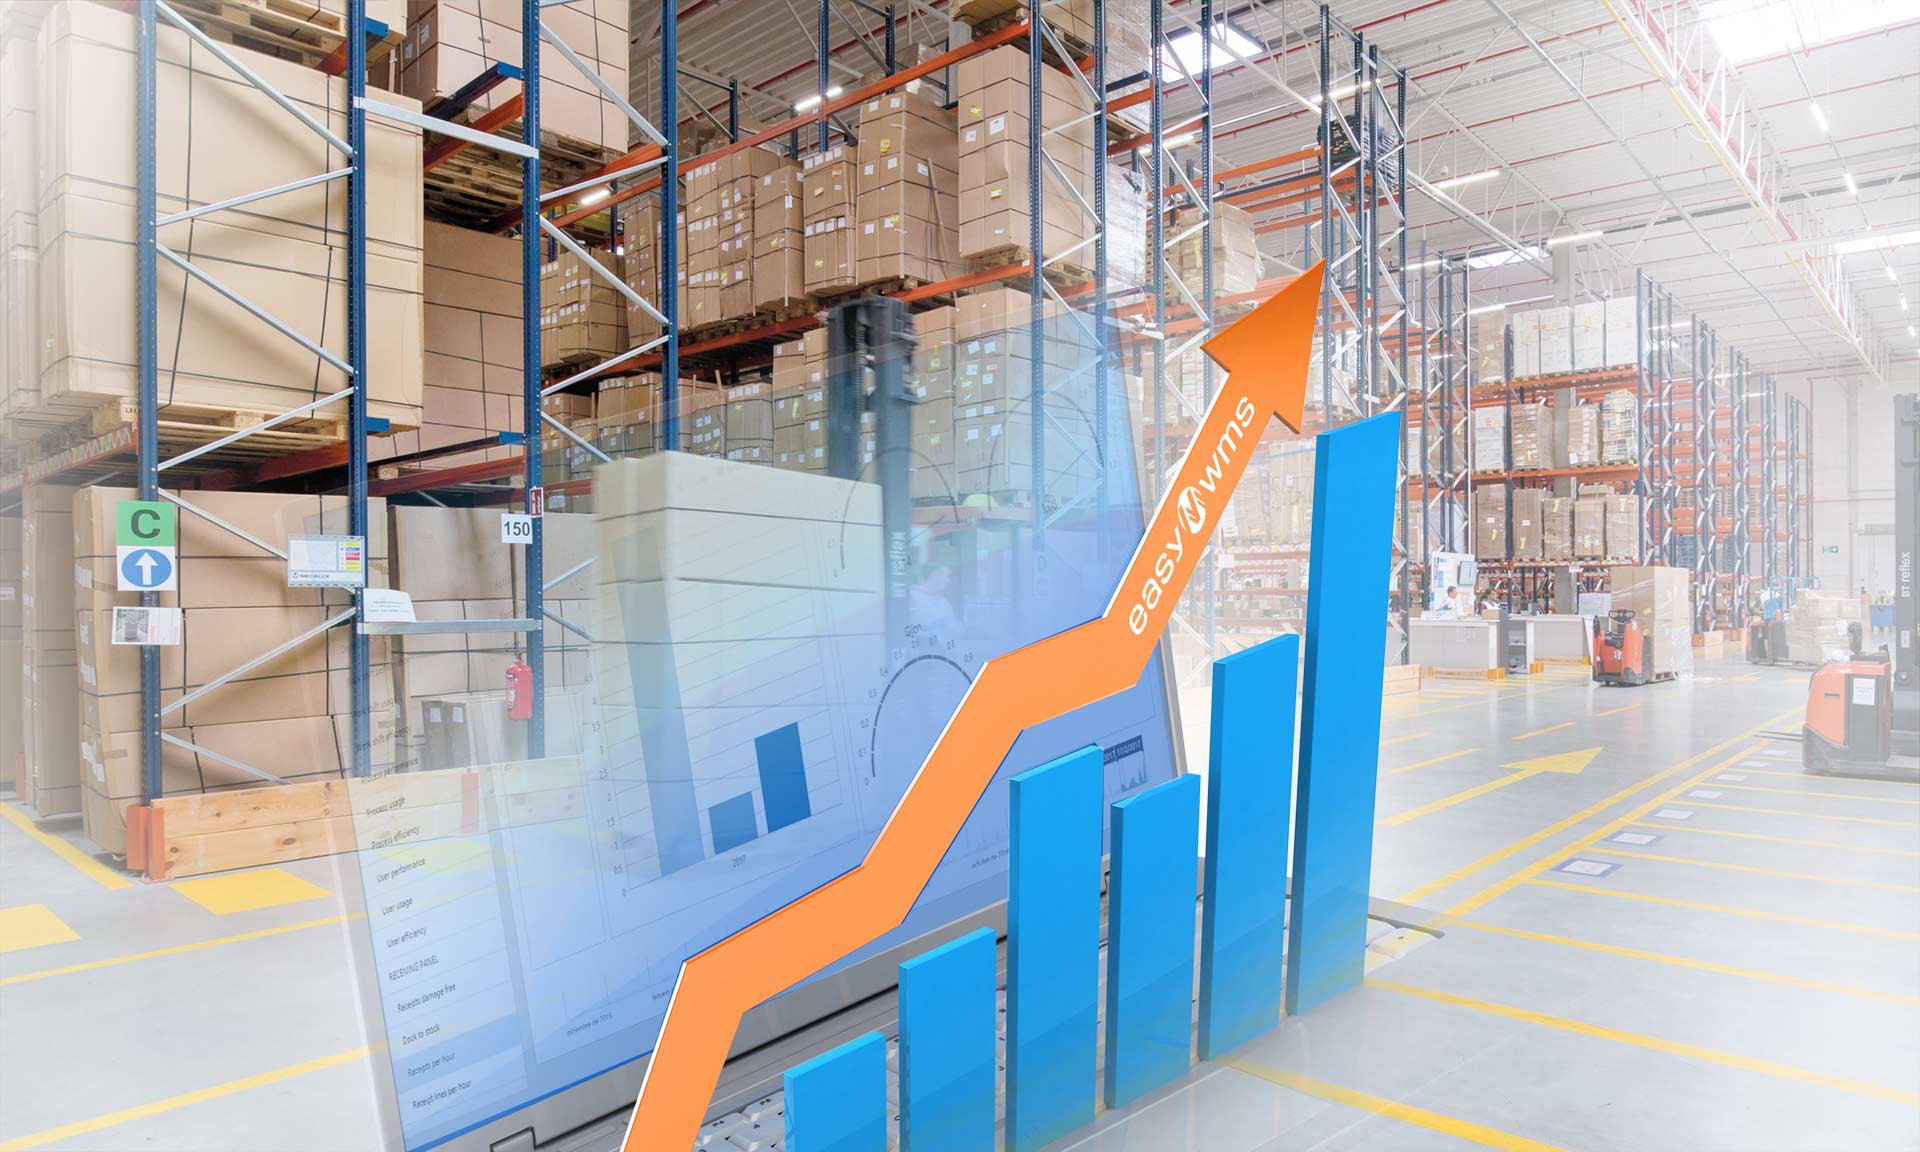 Logistics management consists of organizing flows and products in the warehouse